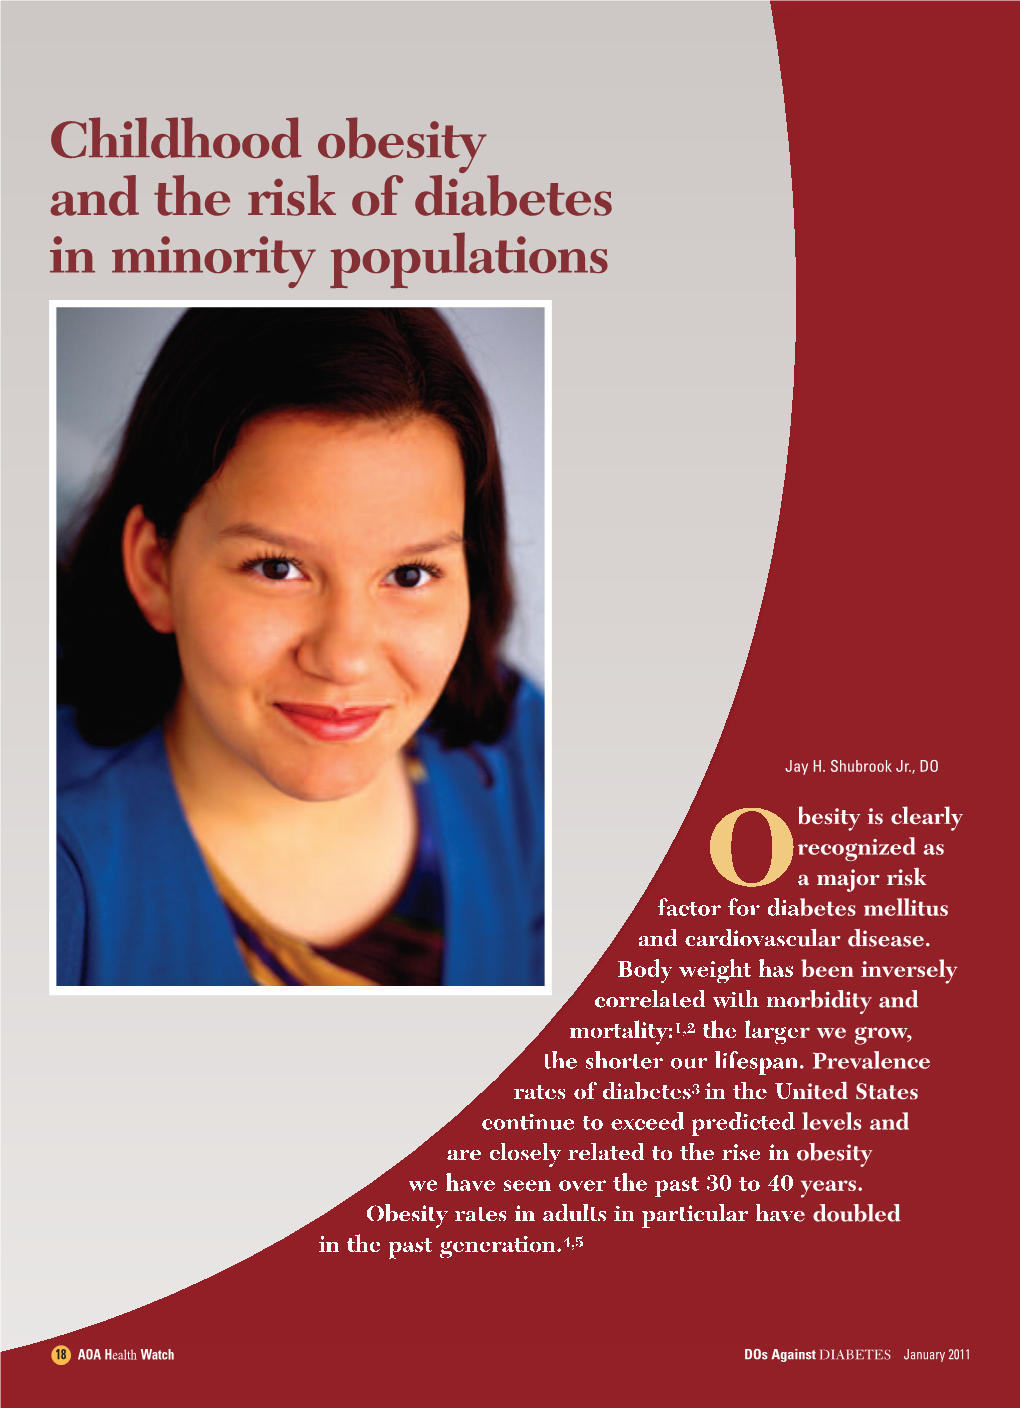 Childhood Obesity and the Risk of Diabetes in Minority Populations